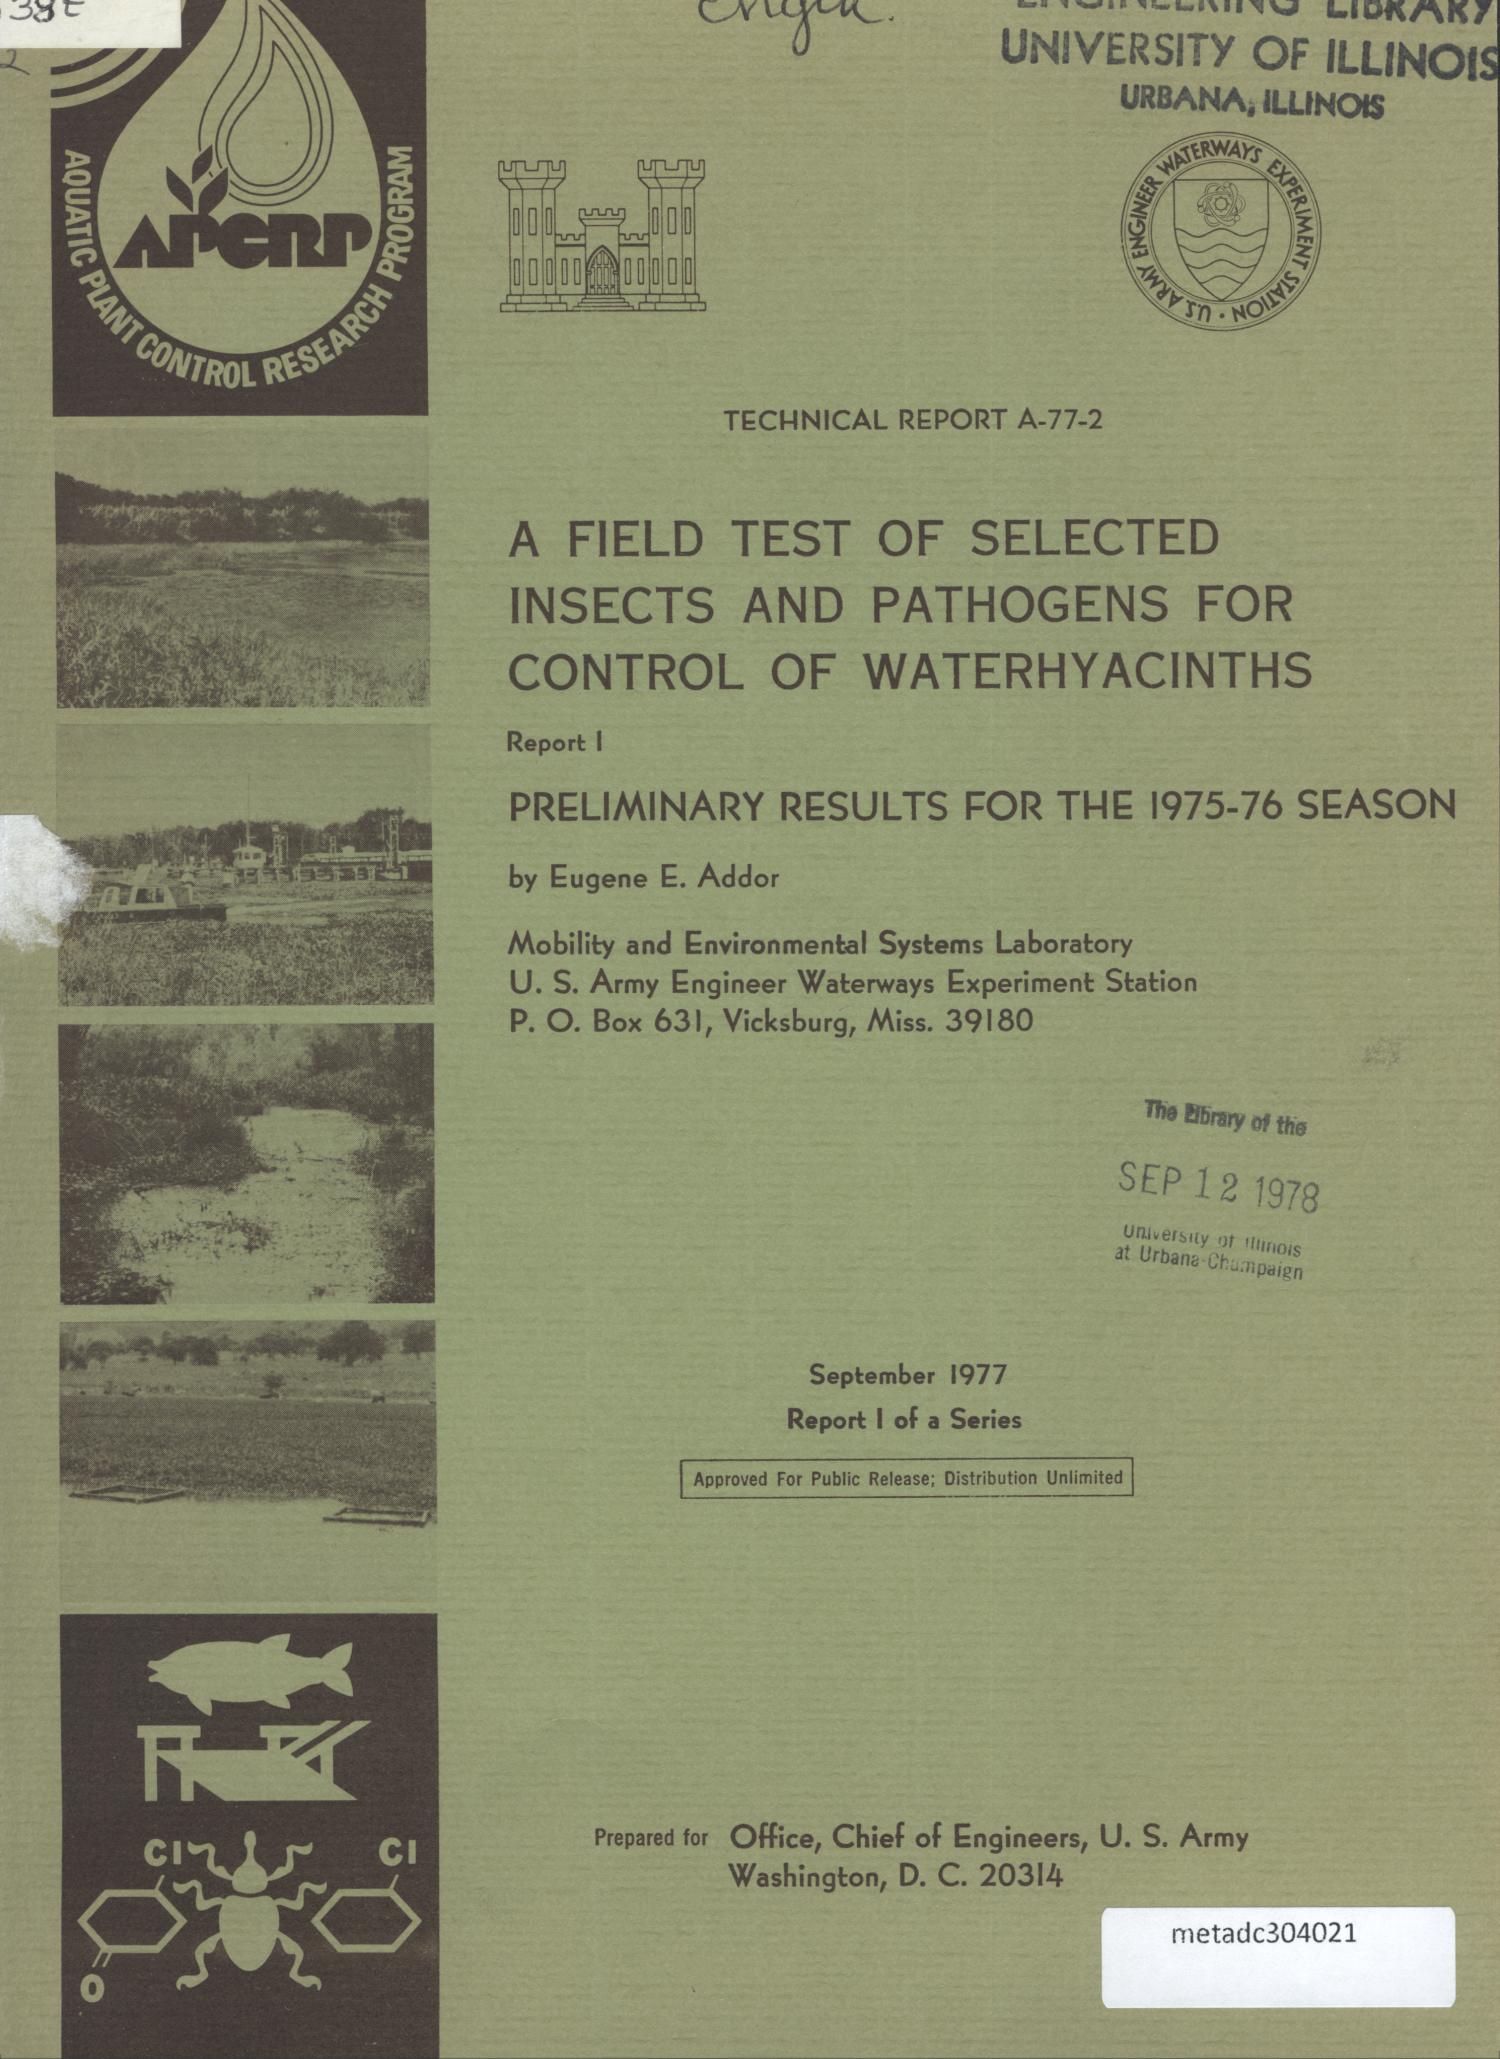 A Field Test of Selected Insects and Pathogens for Control of Waterhyacinths, Report 1: Preliminary Results for the 1975-76 Season
                                                
                                                    [Sequence #]: 1 of 68
                                                